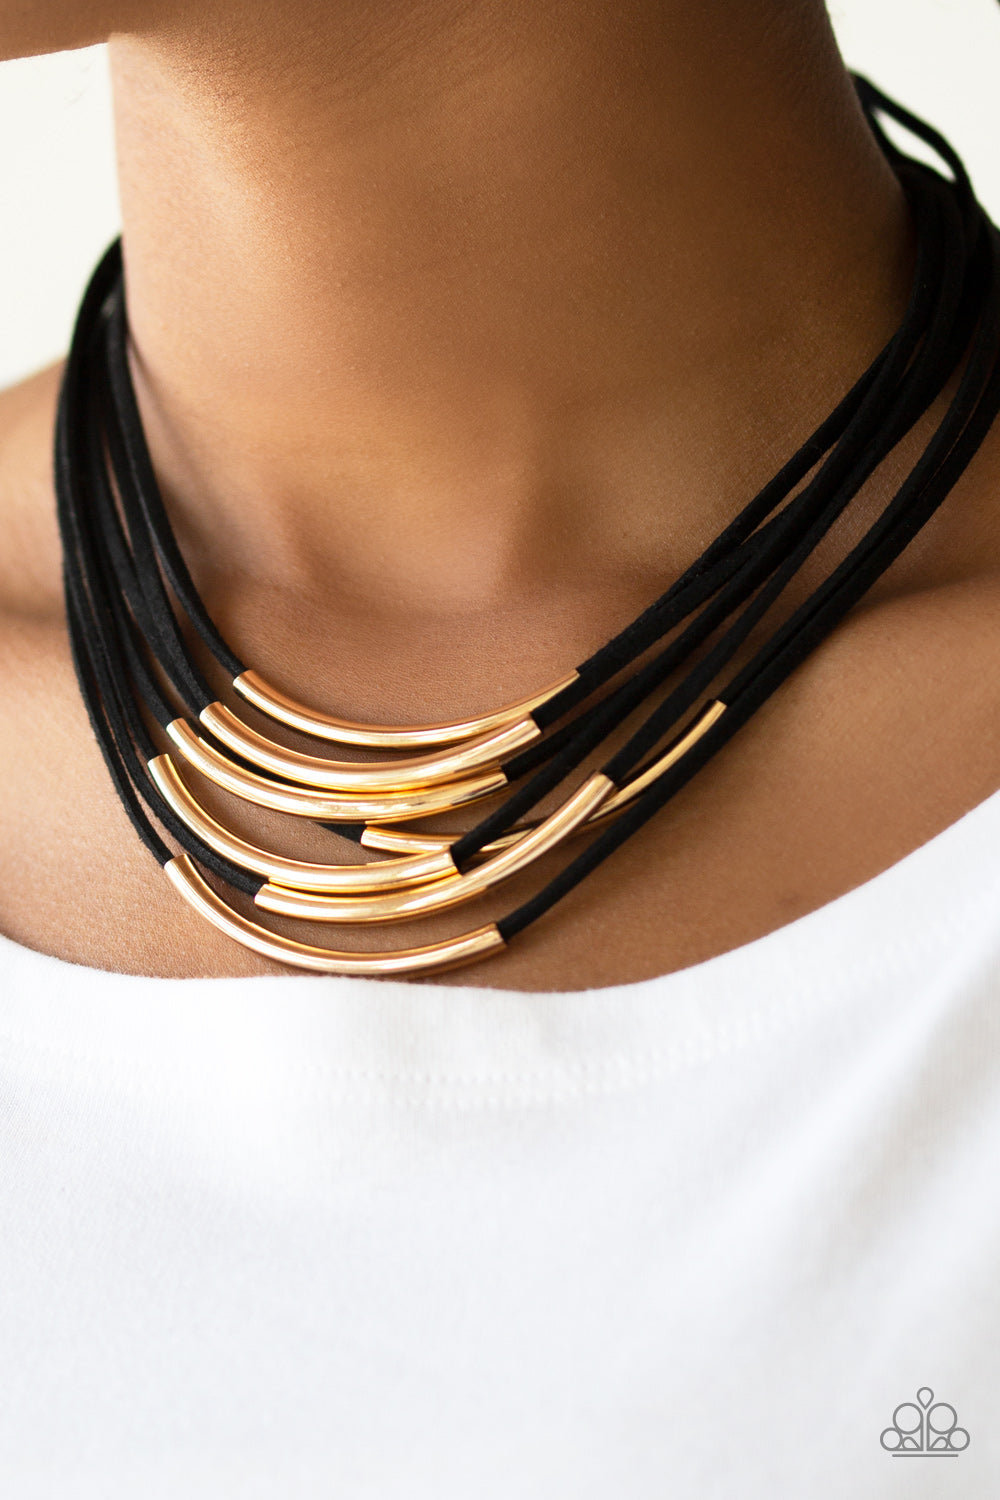 Walk The WALKABOUT Gold Necklace - Paparazzi Accessories  Glistening gold rods slide along strips of black suede, creating earthy layers below the collar. Features an adjustable clasp closure.  All Paparazzi Accessories are lead free and nickel free!  Sold as one individual necklace. Includes one pair of matching earrings.